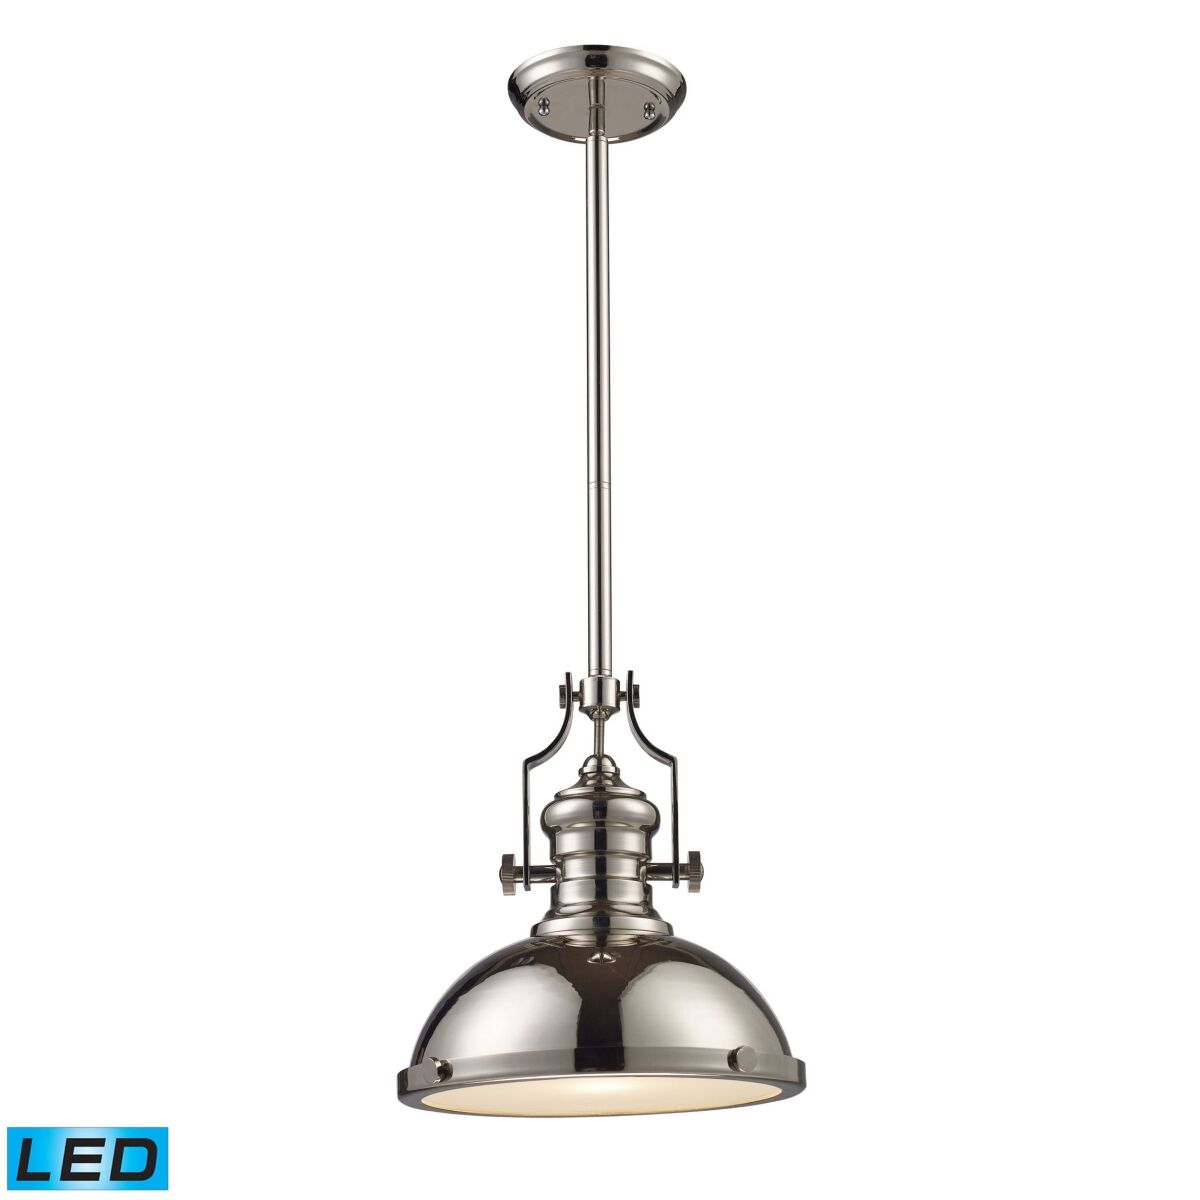 Macy's Chadwick 1-Light Pendant in Polished Nickel - Led Offering Up To 800 Lumens (60 Watt Equivalent) - Silver